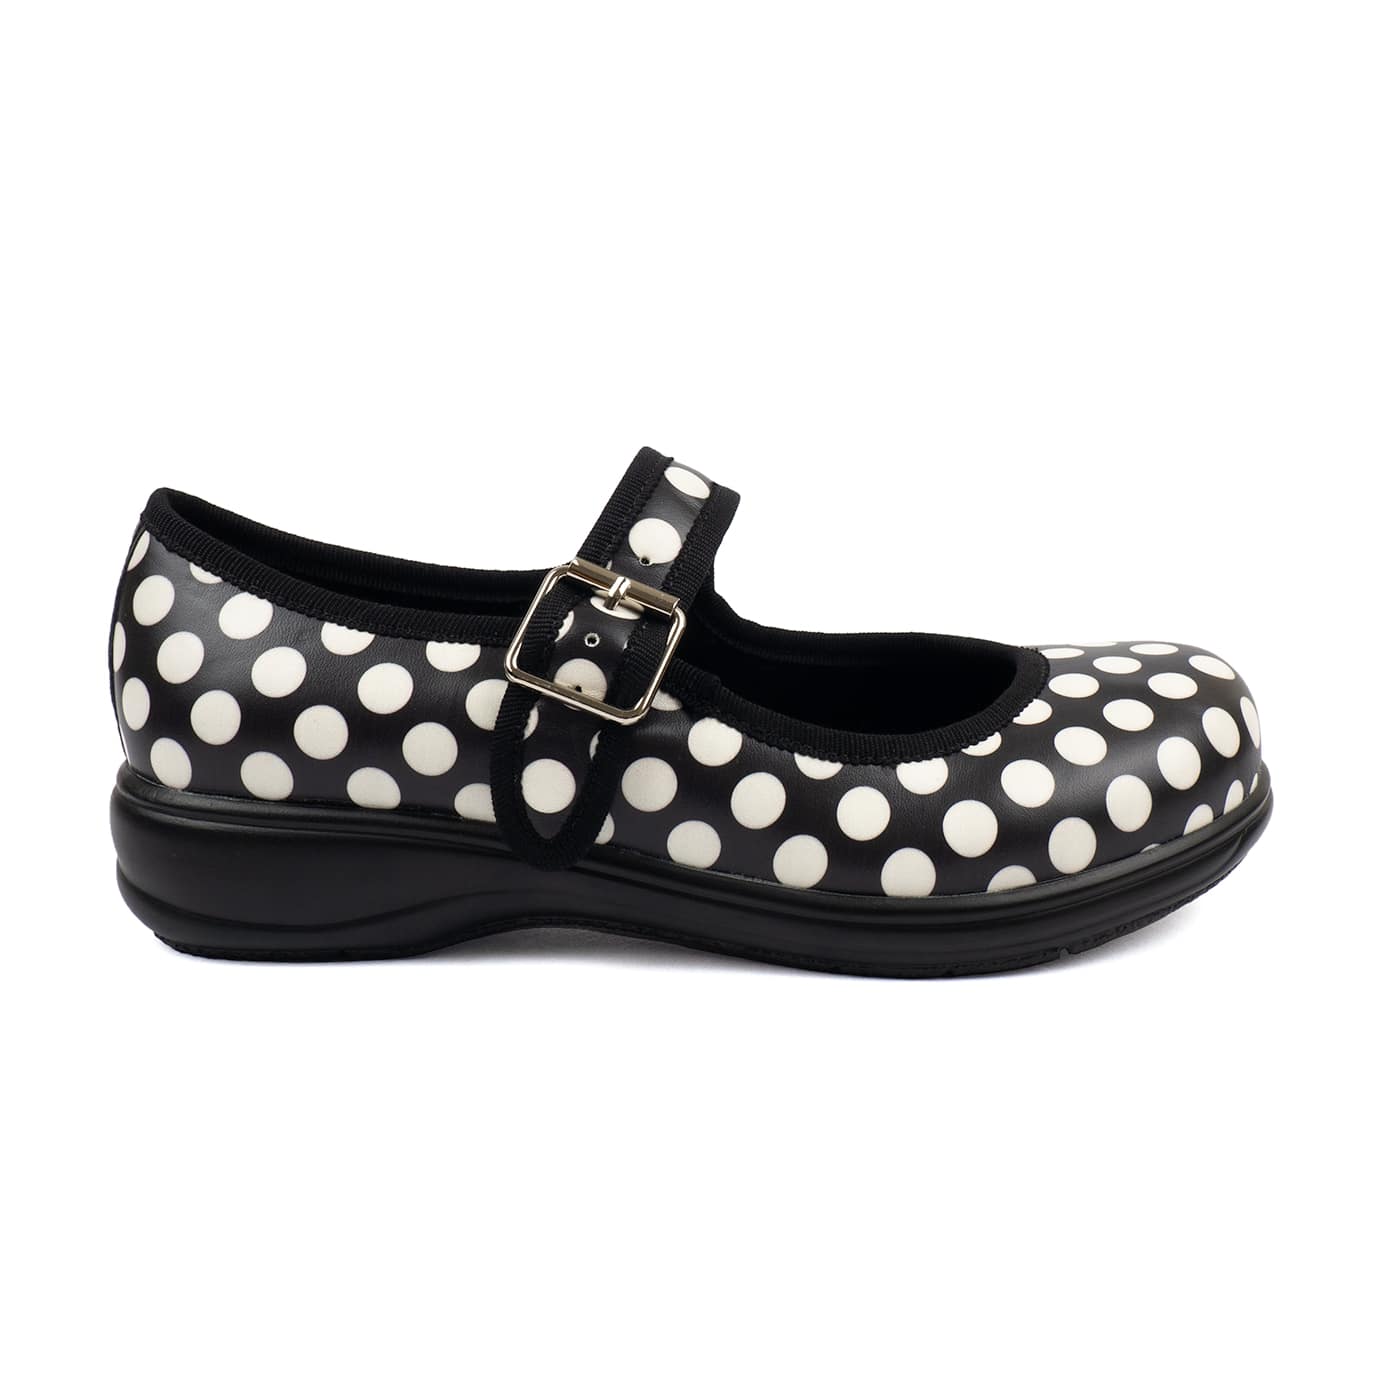 Monochrome Mary Janes by RainbowsAndFairies.com (Black & White - Polka Dots - Stripes - Mismatched Shoes - Shoes - Pair & A Spare) - SKU: FW_MARYJ_MONOC_ORG - Pic 08